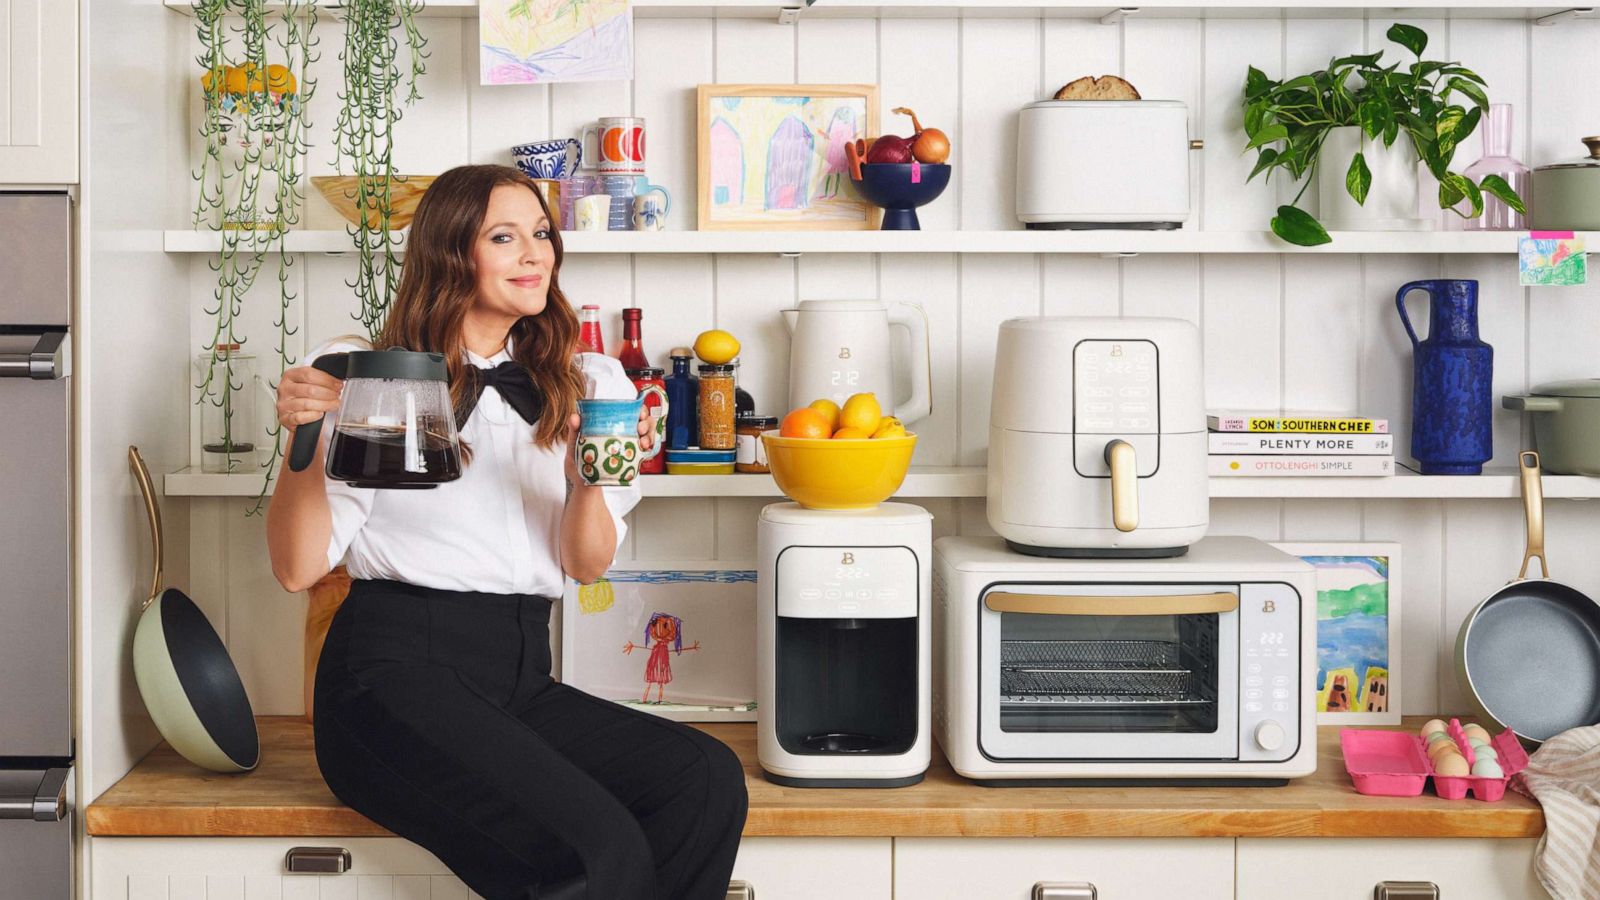 Drew Barrymore's Beautiful Kitchenware is the Perfect Mother's Day